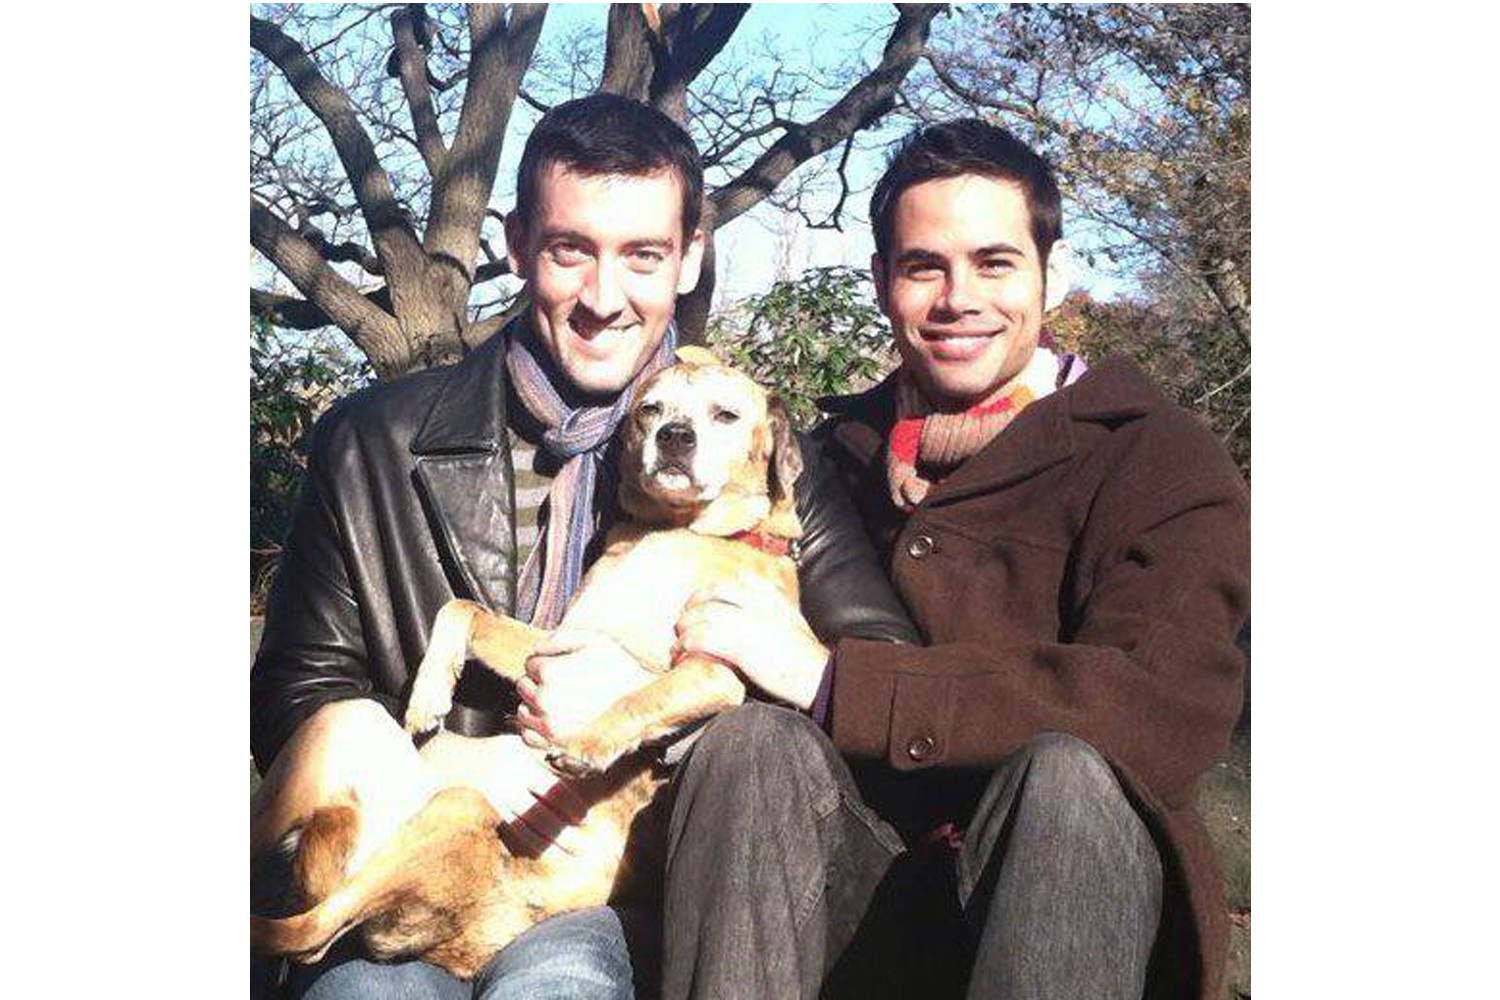 Kent and chase hold their dog as they smile at the camera